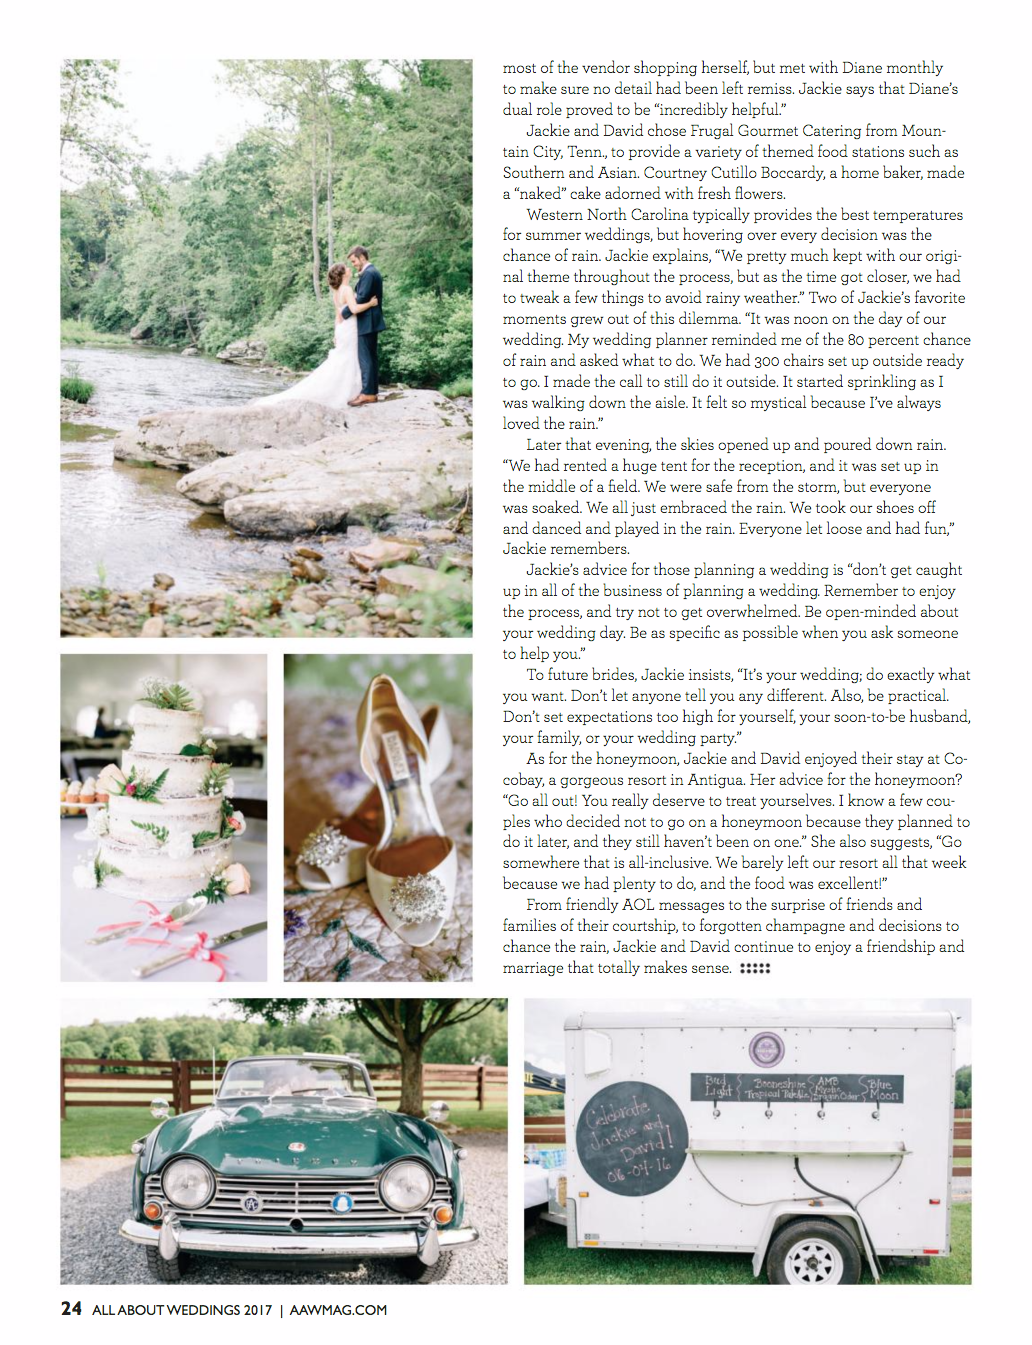 Jackie + David's Wedding was featured on the Cover of All About Weddings Magazine! Photography by Revival Photography www.revivalphotography.com